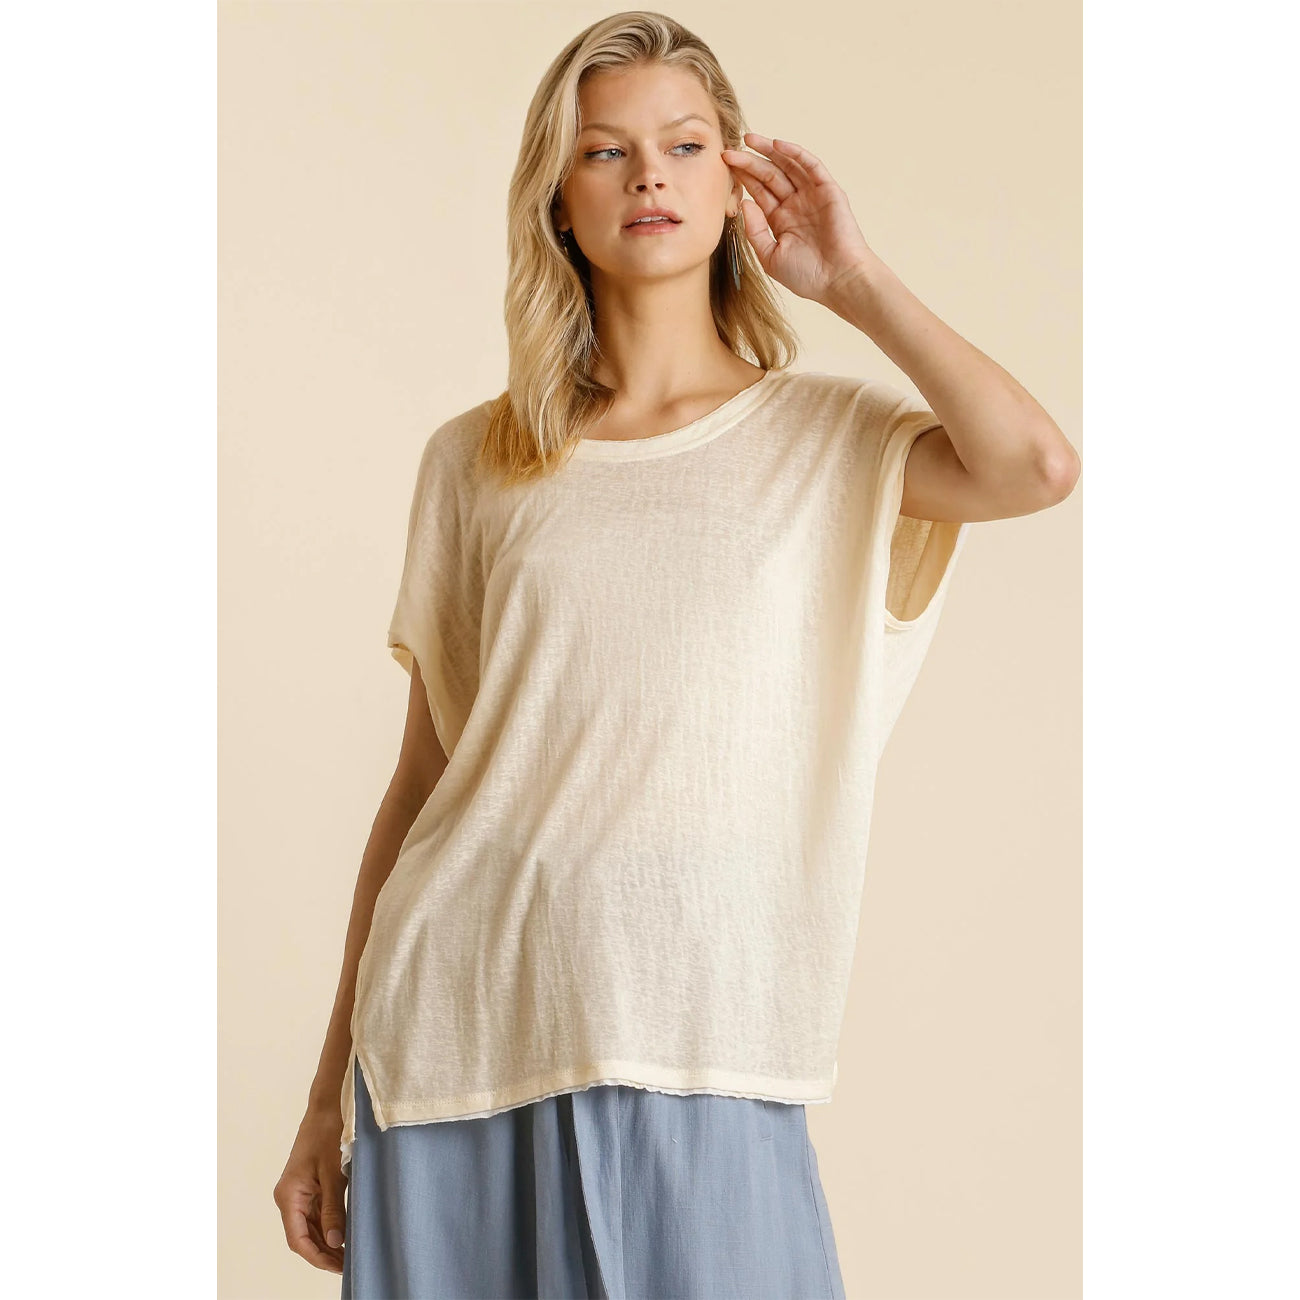 Ivory Dolman Sleeve Scoop Neck Women's Top With Side Slit